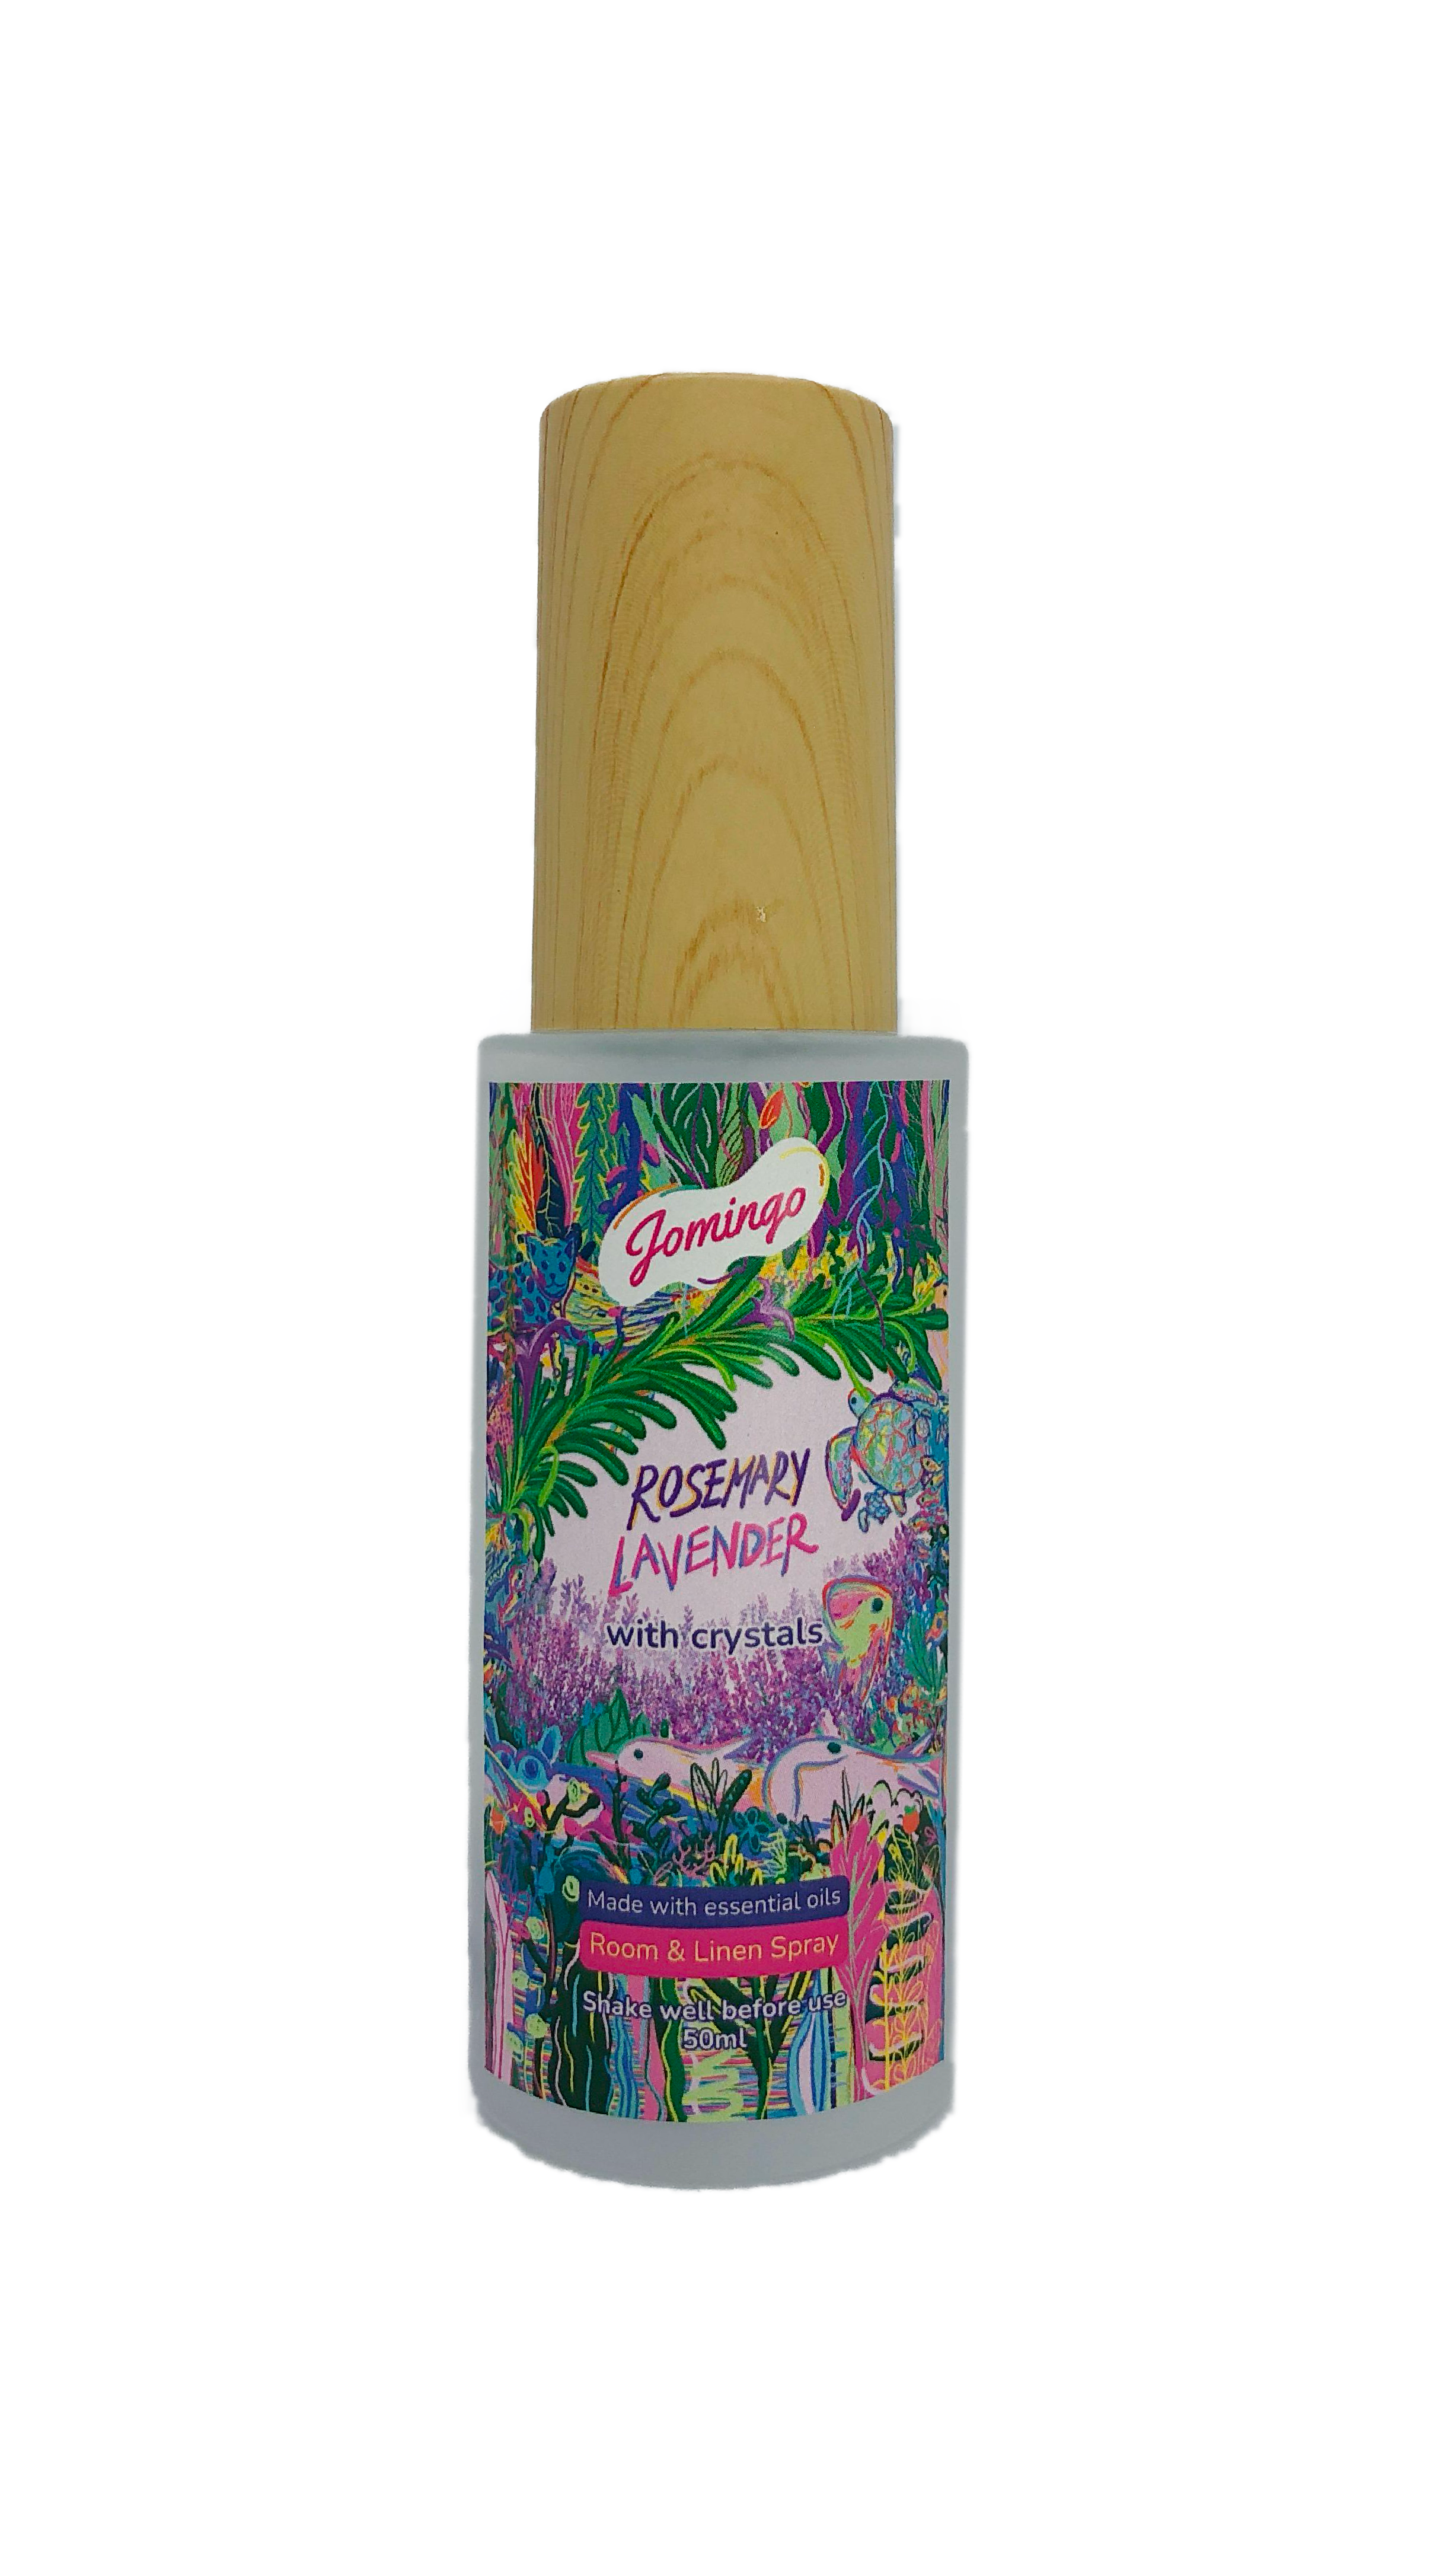 NEW! Natural, Alcohol-Free Room & Linen Spray Rosemary Lavender with Amethyst Crystals